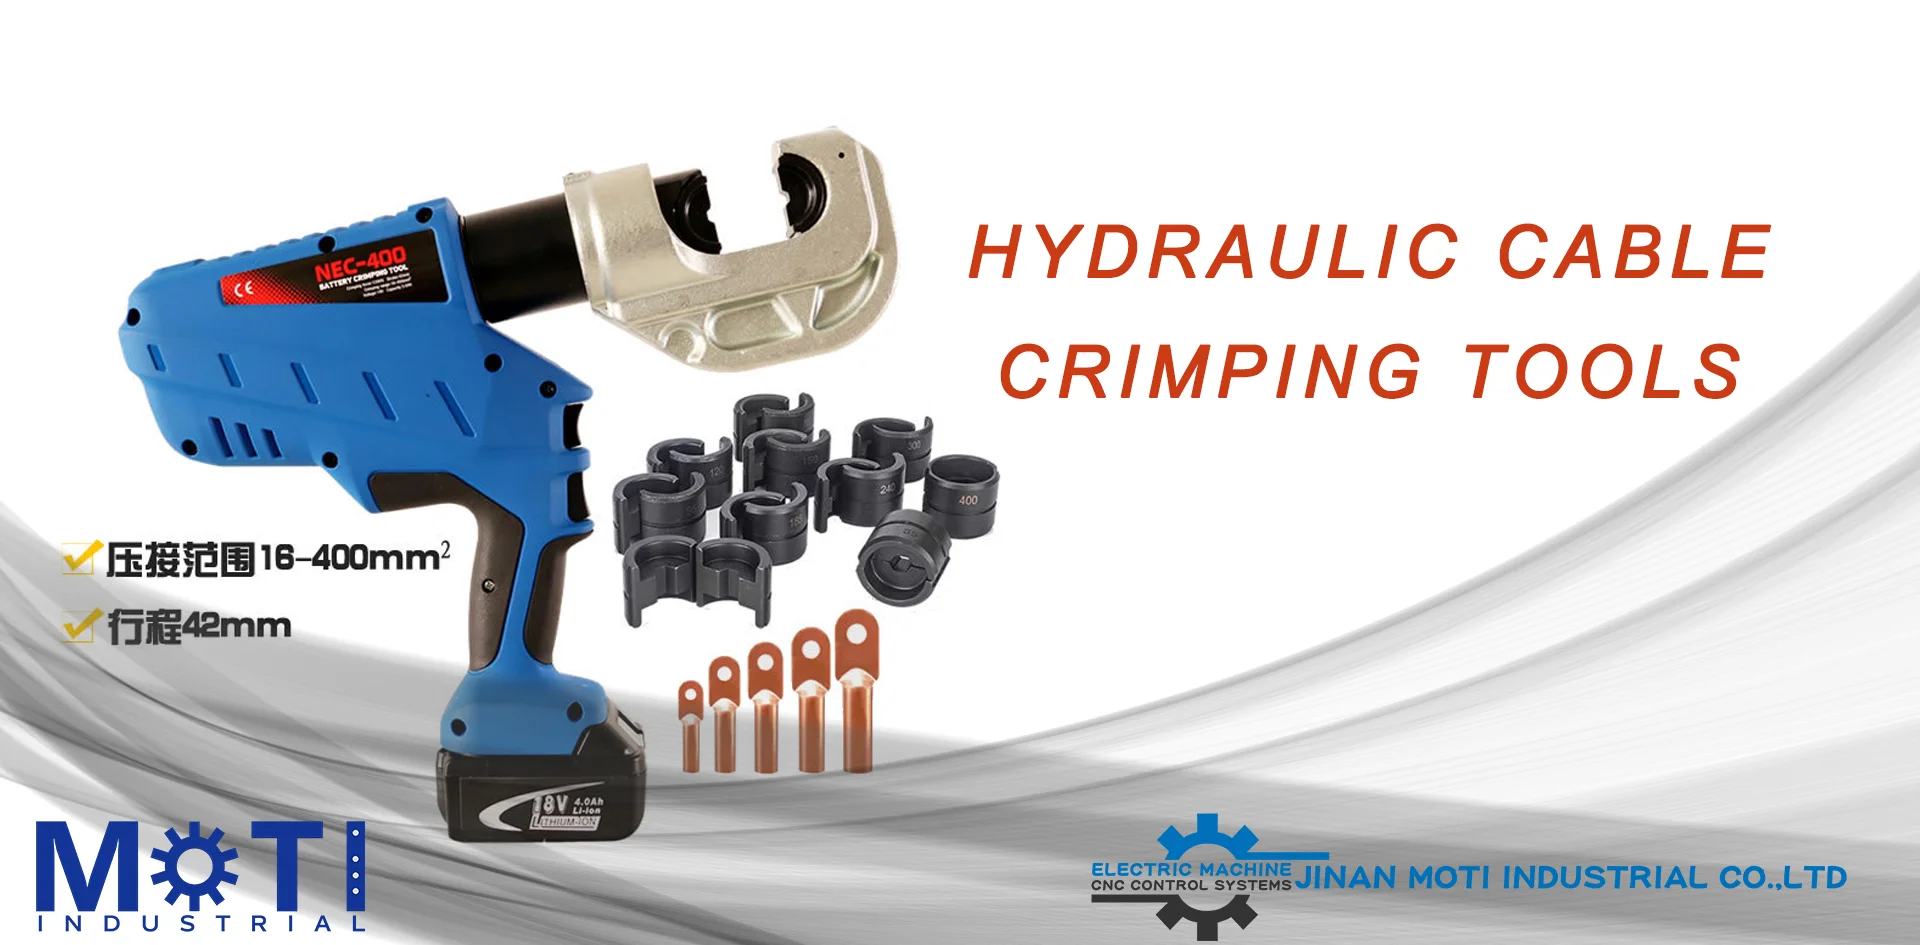 HYDRAULIC CABLE CRIMPING TOOLS